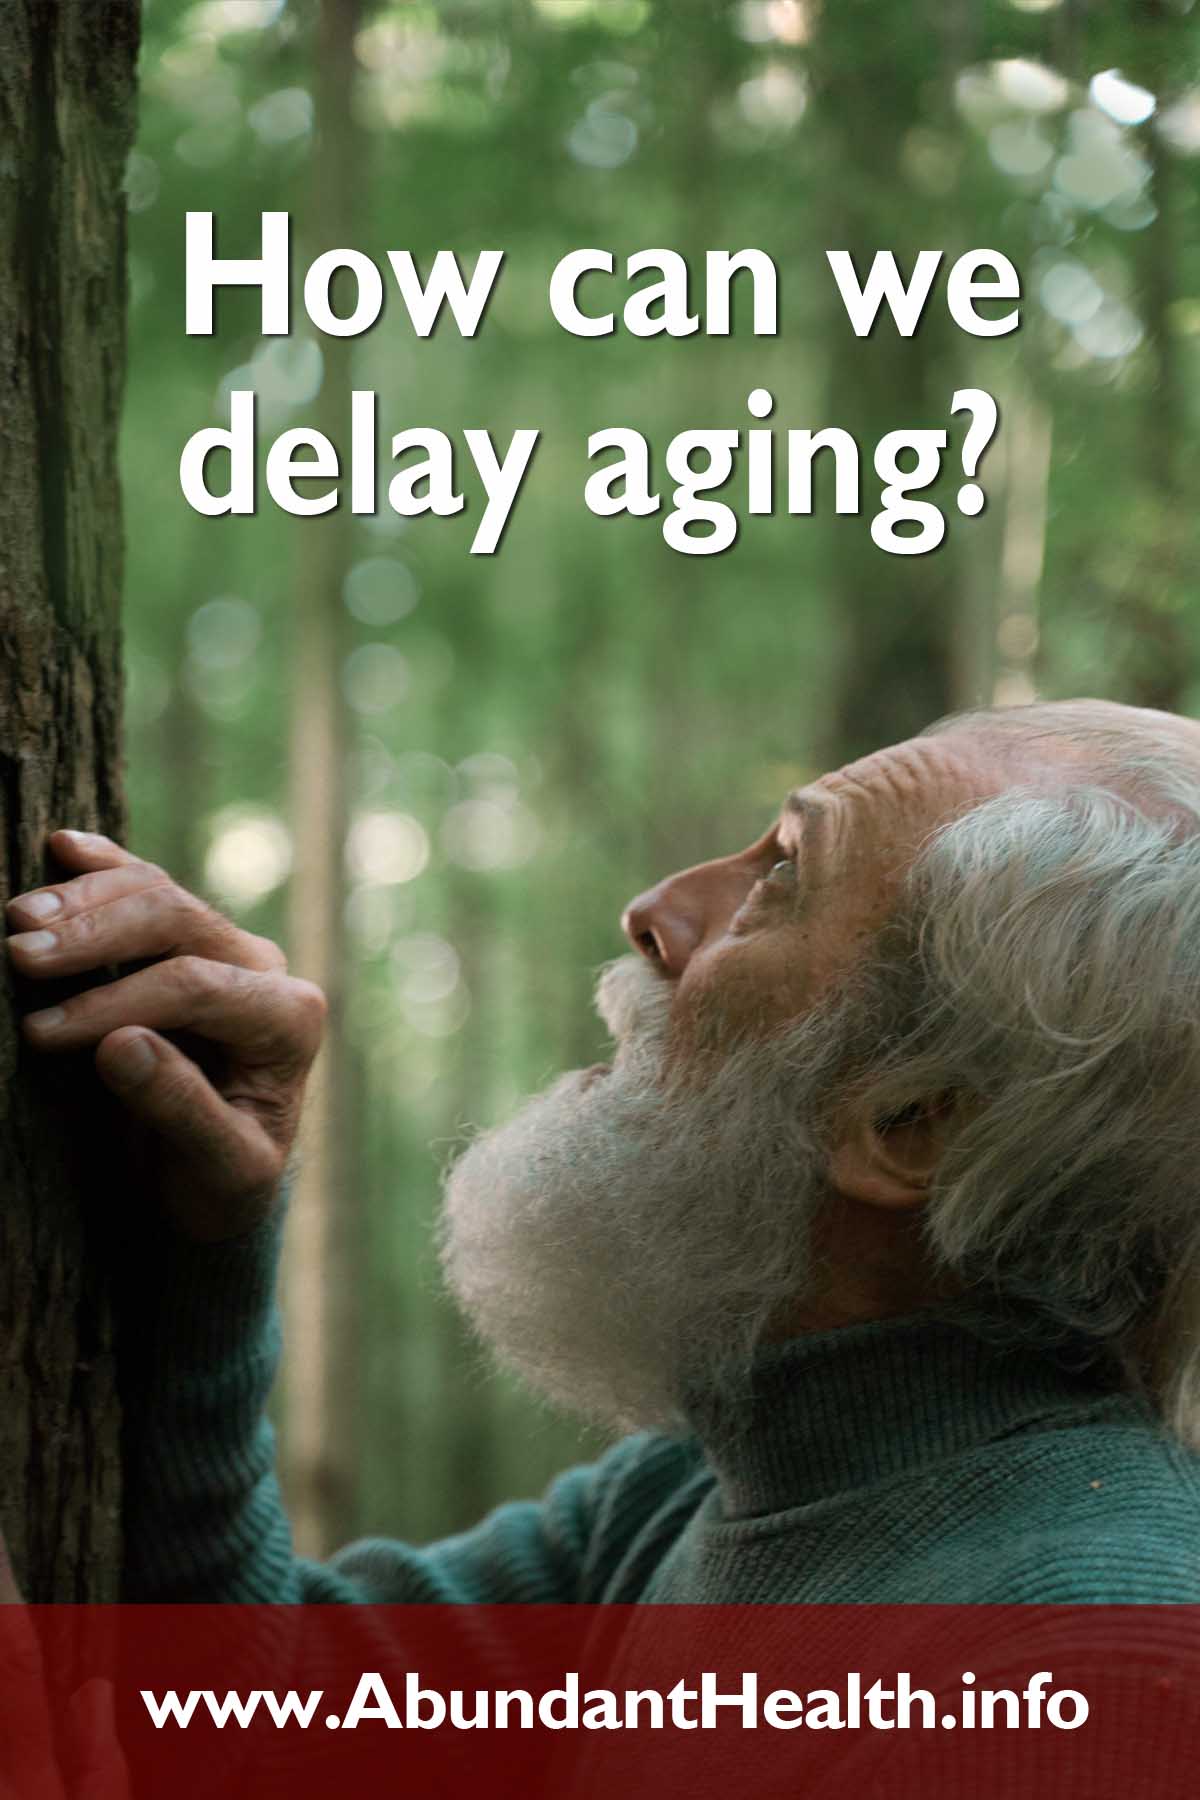 How can we delay aging?